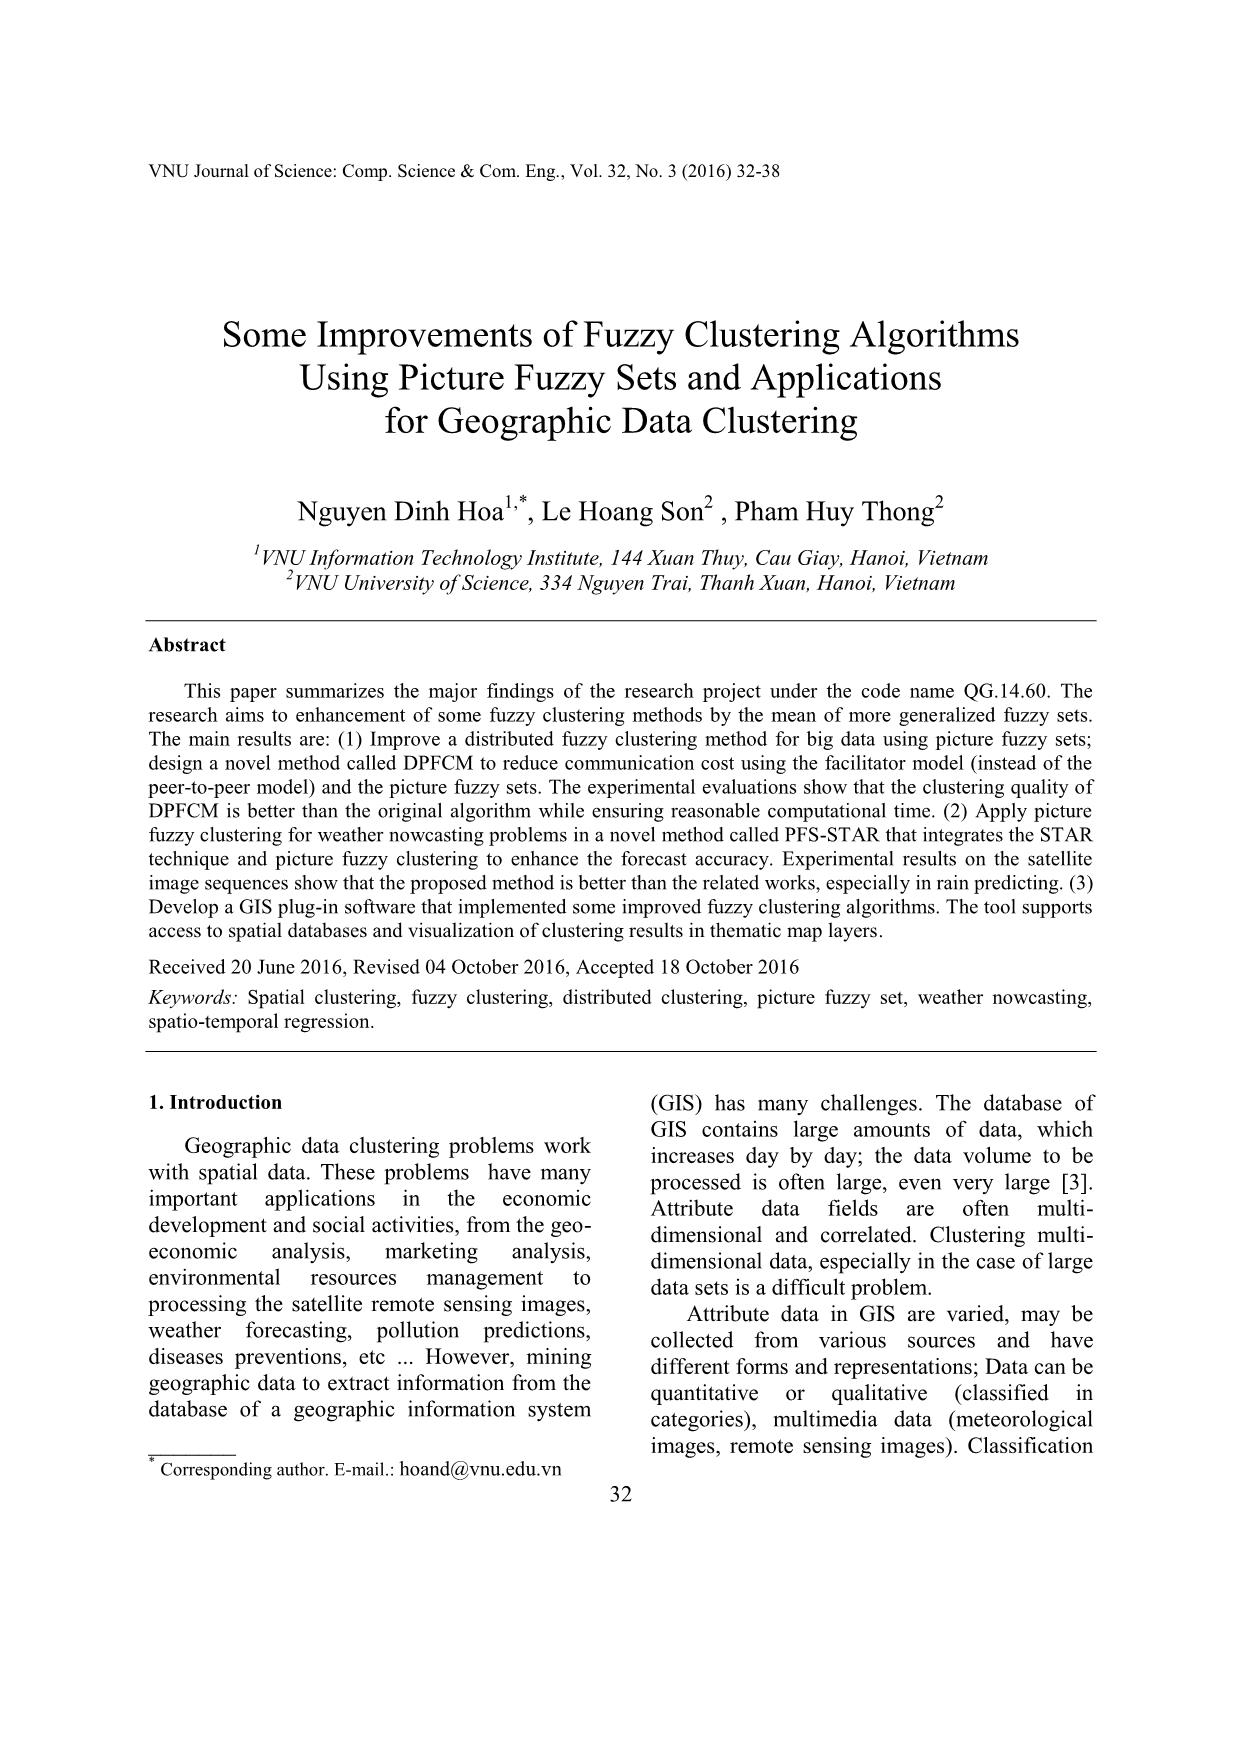 Some improvements of fuzzy clustering algorithms using picture fuzzy sets and applications for geographic data clustering trang 1